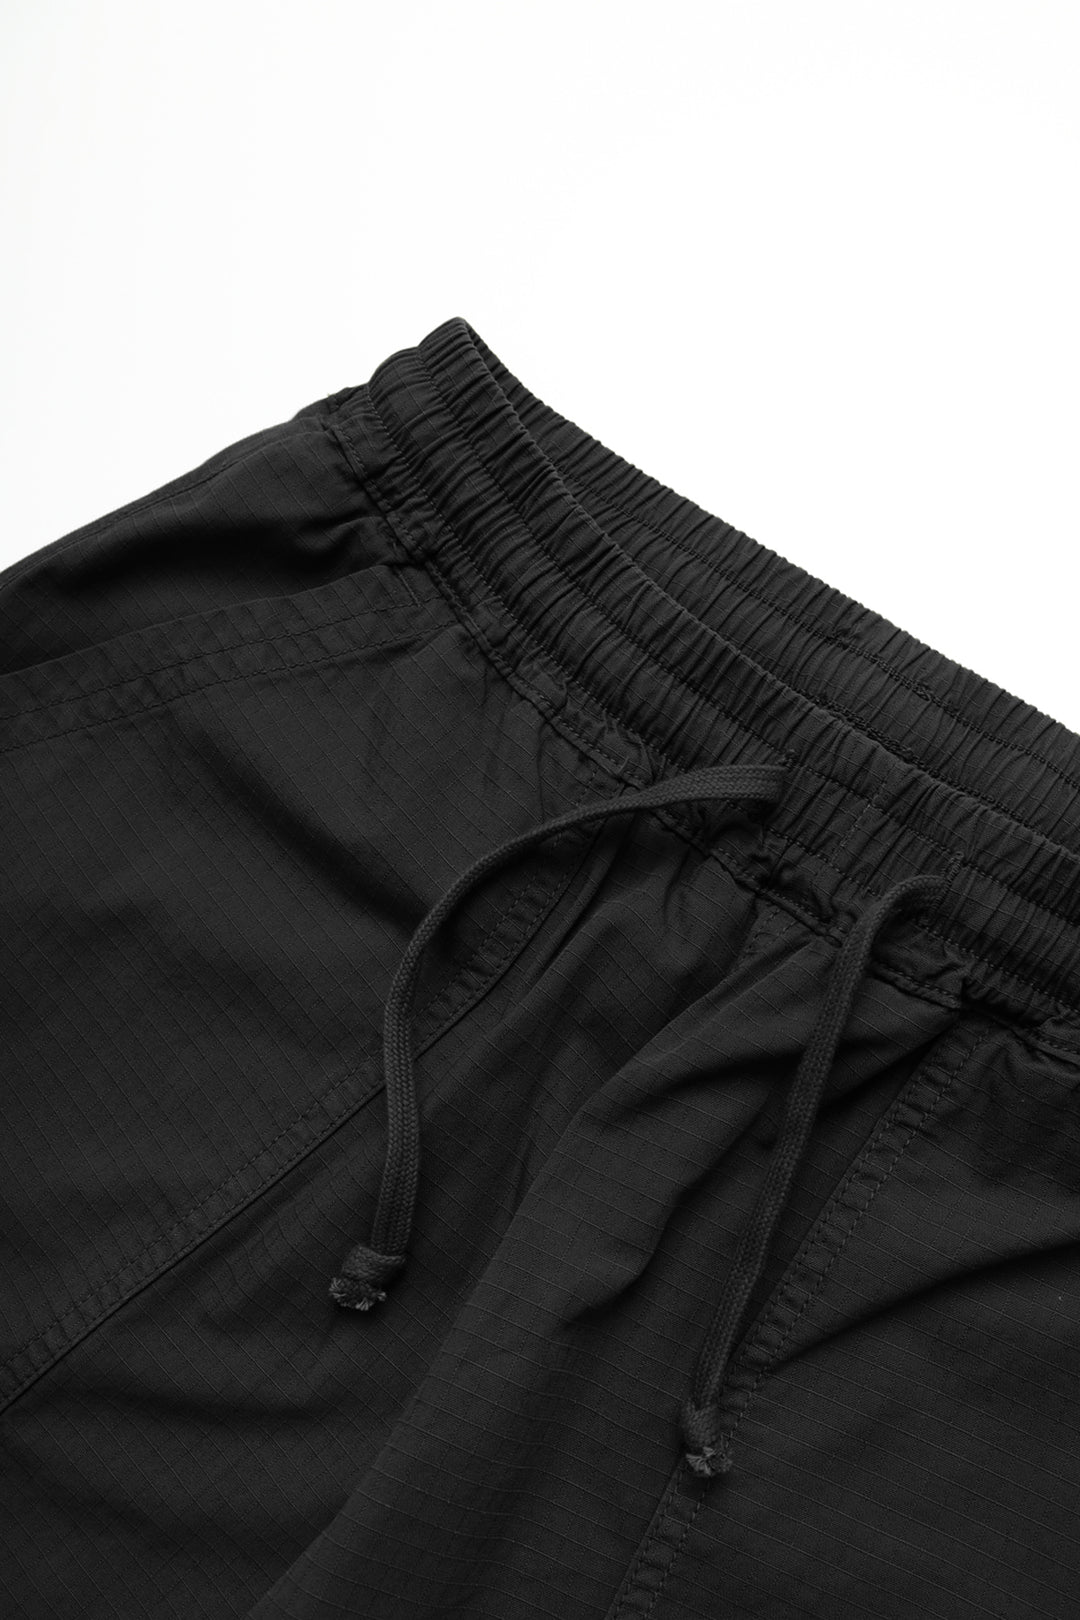 Service Works - Ripstop Chef Pants - Black